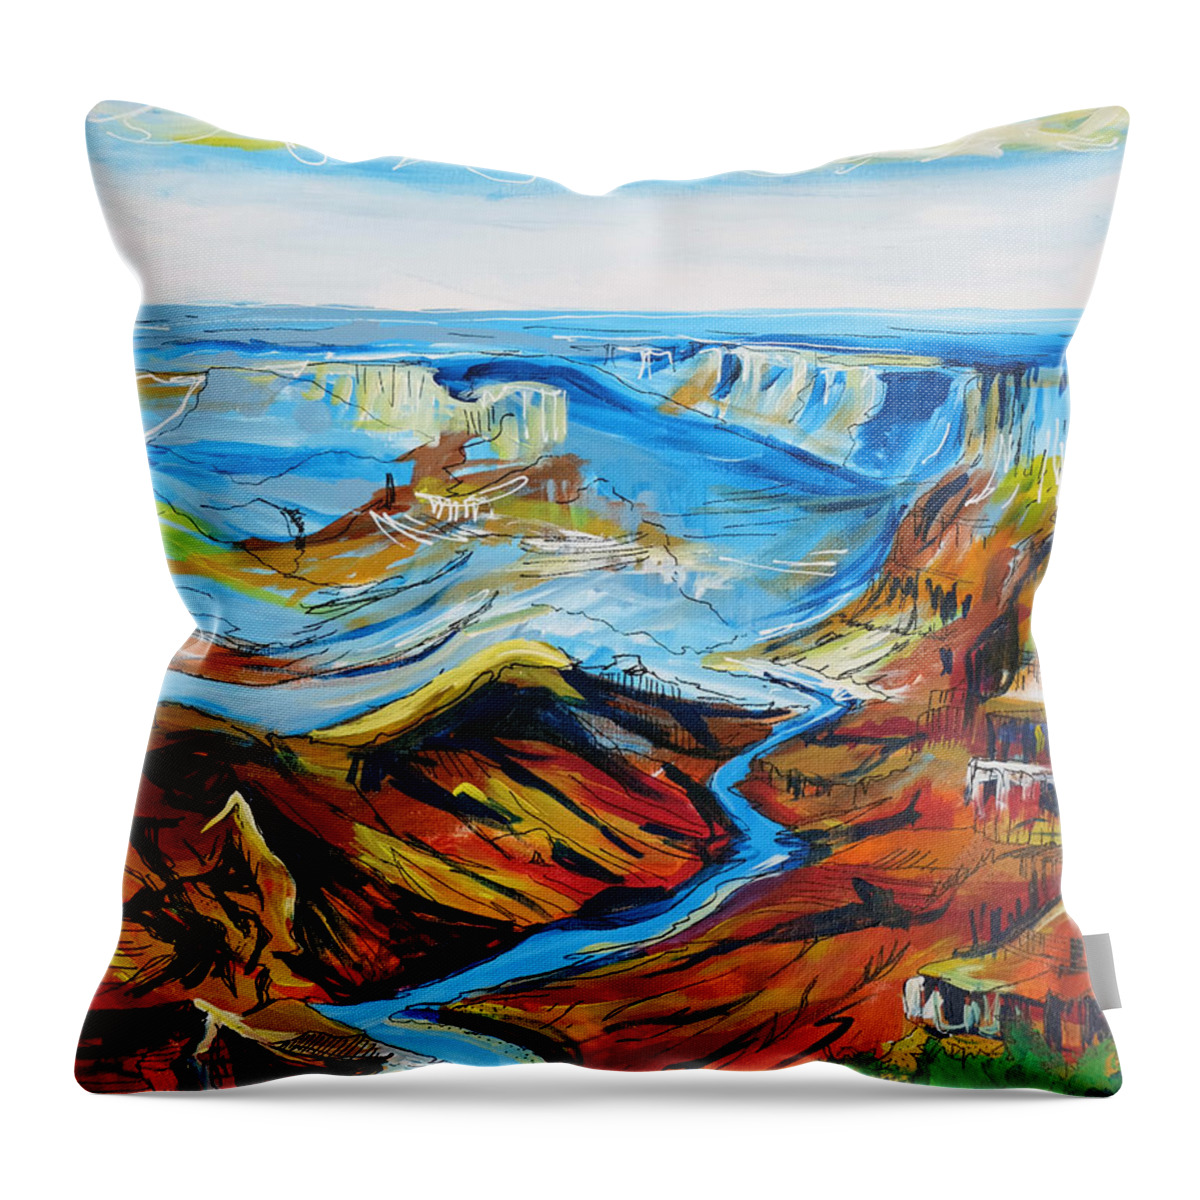 Grand Canyon Throw Pillow featuring the painting Grand Canyon III by Laura Hol Art